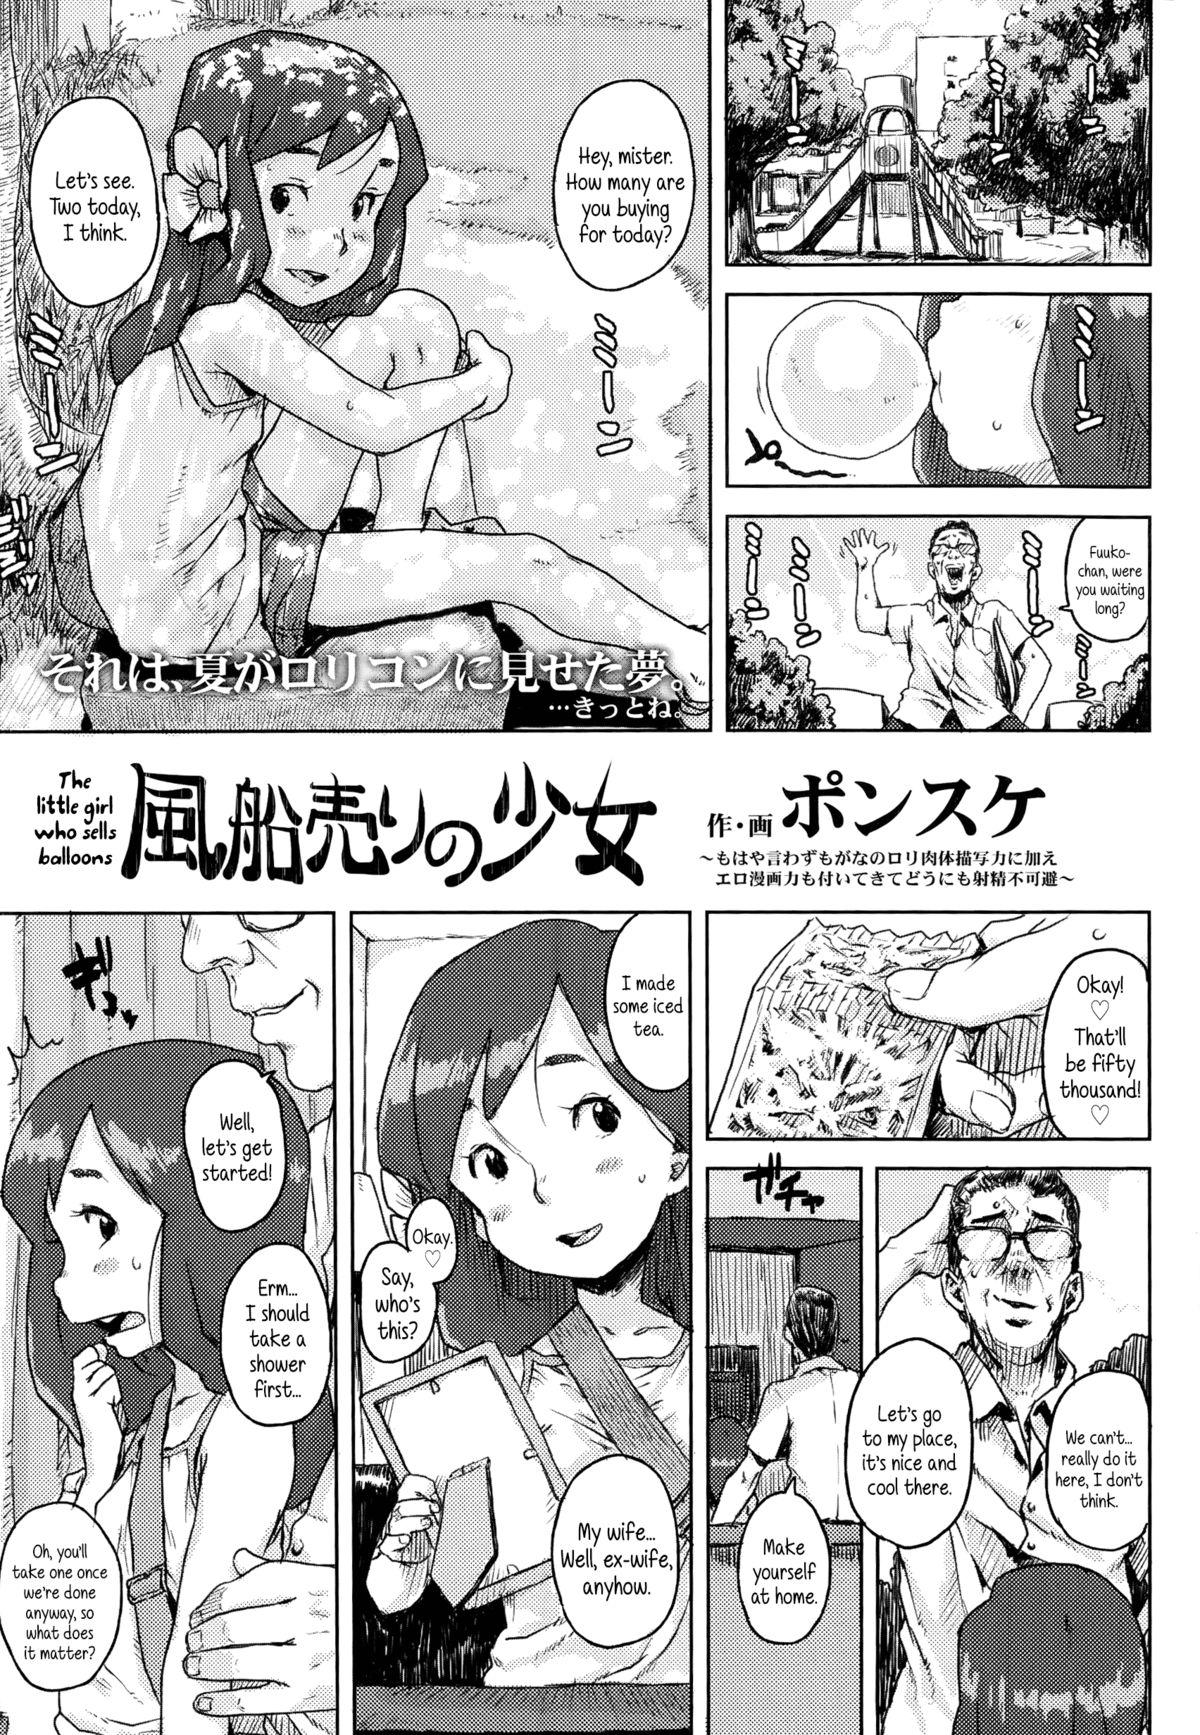 Pussy Fuusen Uri no Shoujo | The Girl Who Sells Balloons Culona - Picture 1